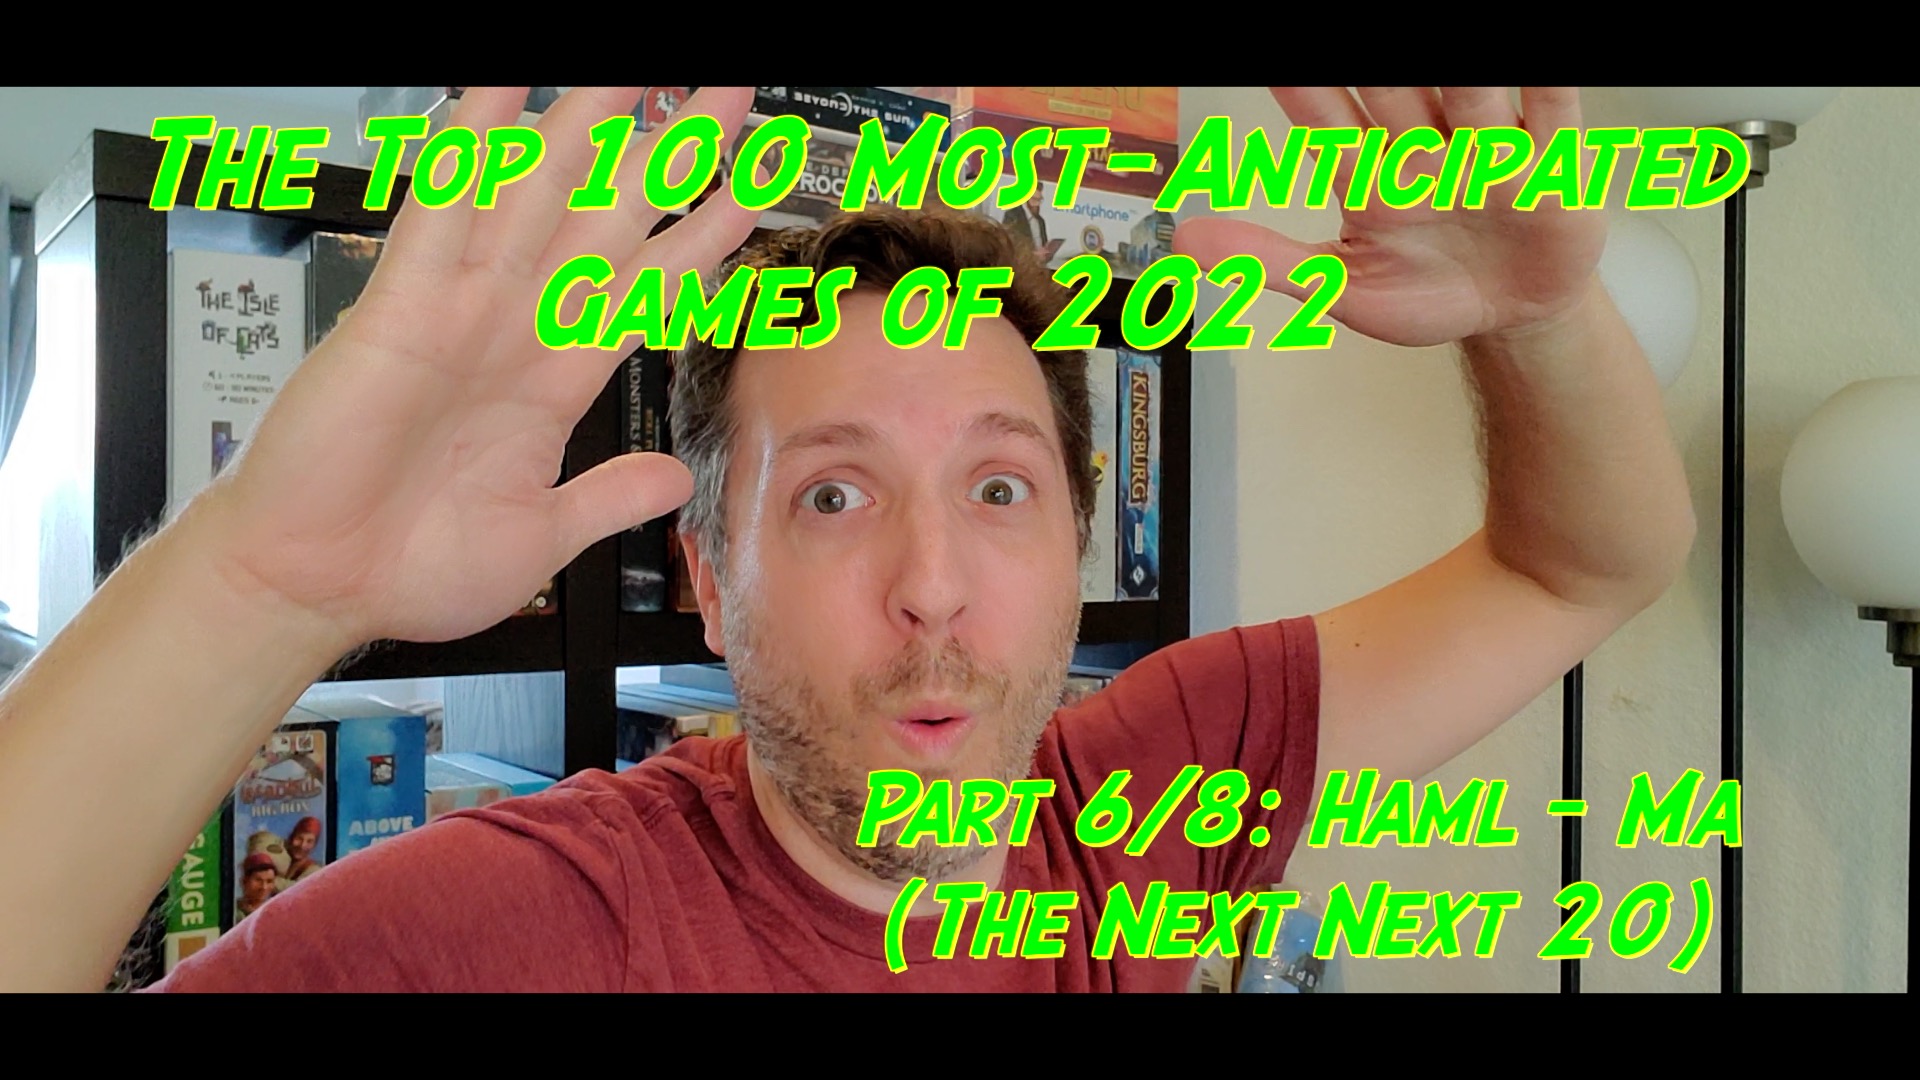 The Top 100 Most-Anticipated Games of 2022, Part 6/8: Haml – Ma (The Next Next 20)